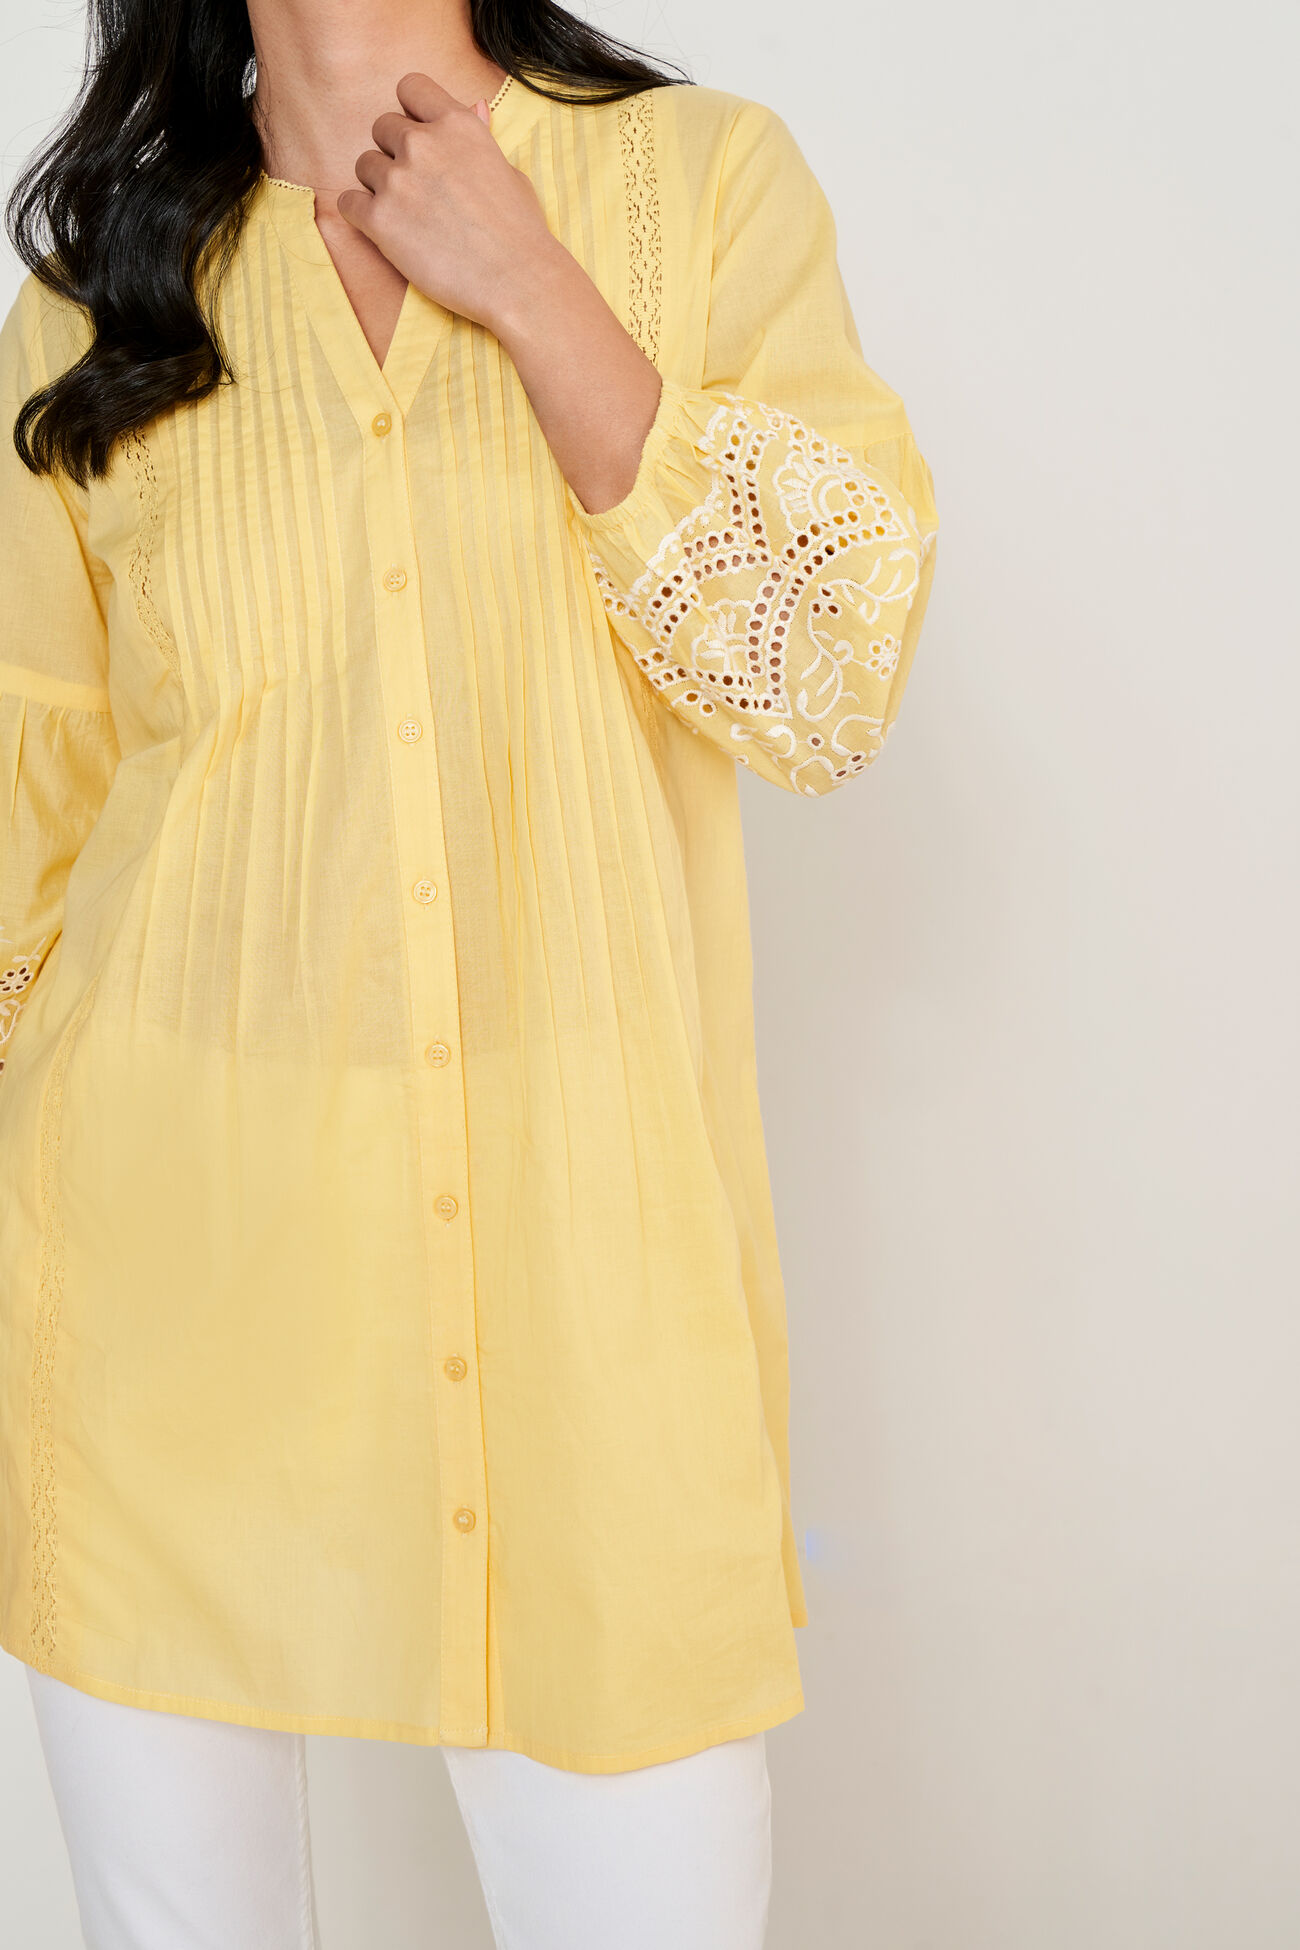 Yellow Solid Embroidered Shirt Style Tunic, Yellow, image 6